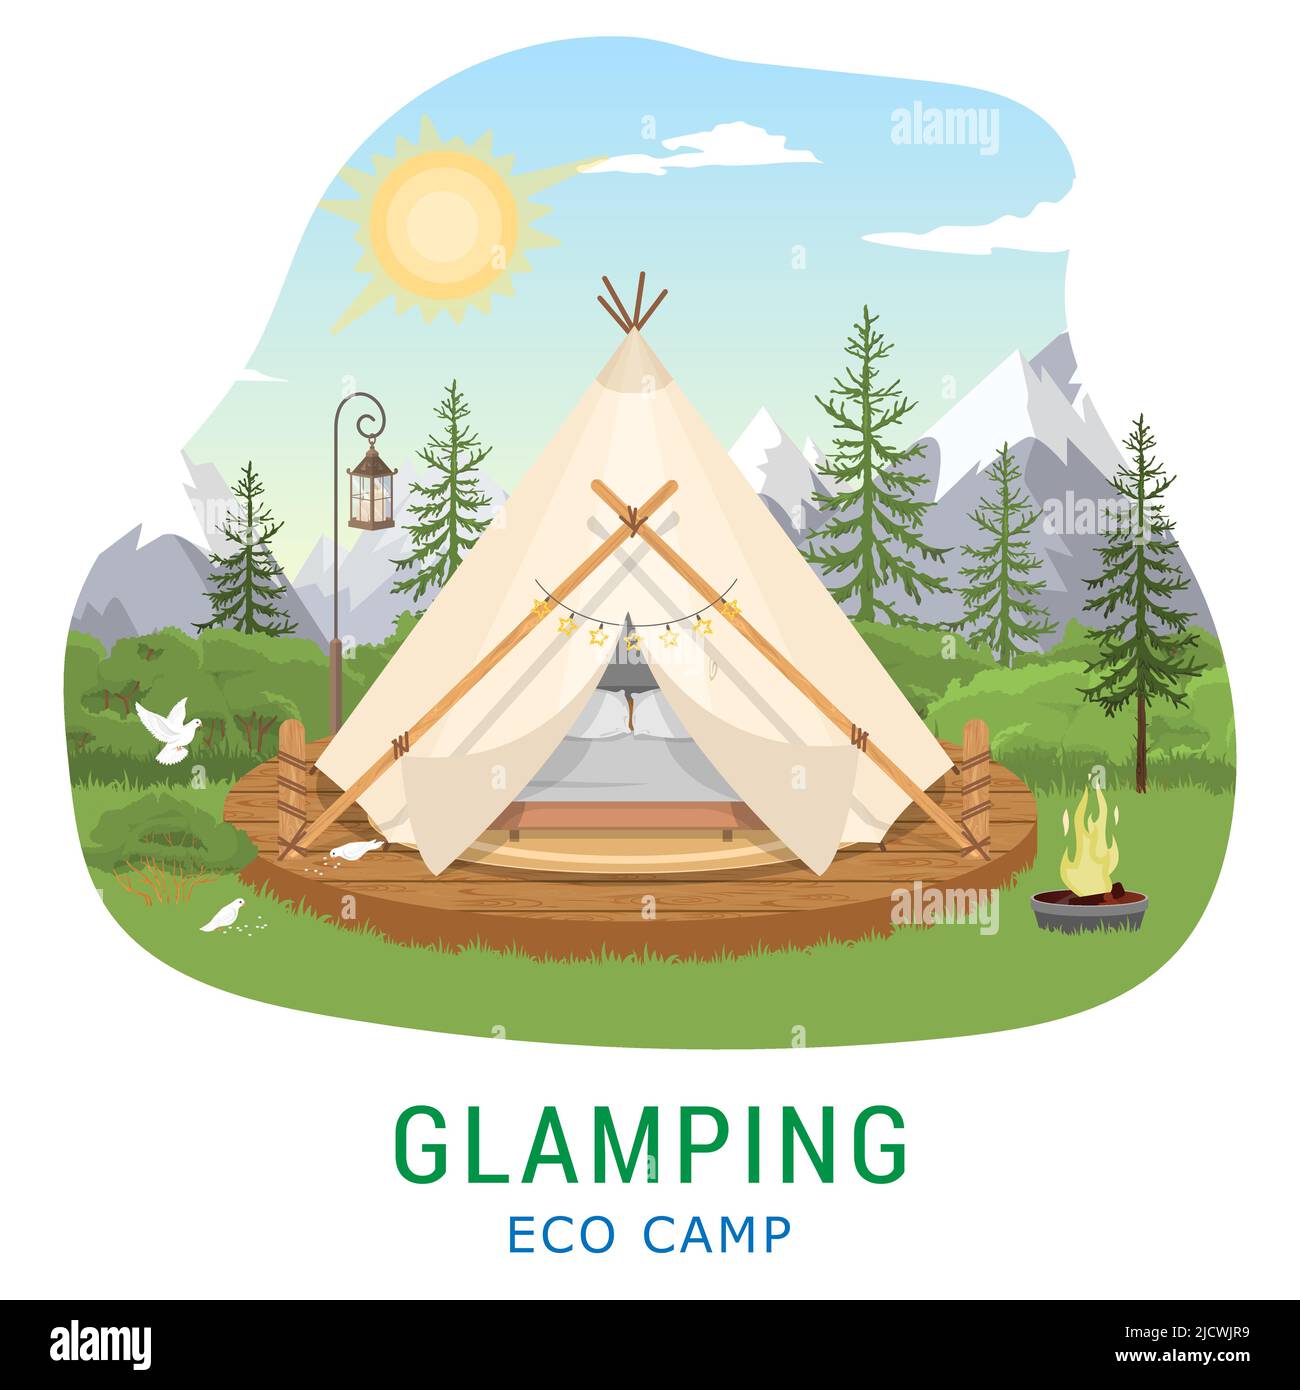 Glamping advertising eco tent camp vector poster Stock Vector